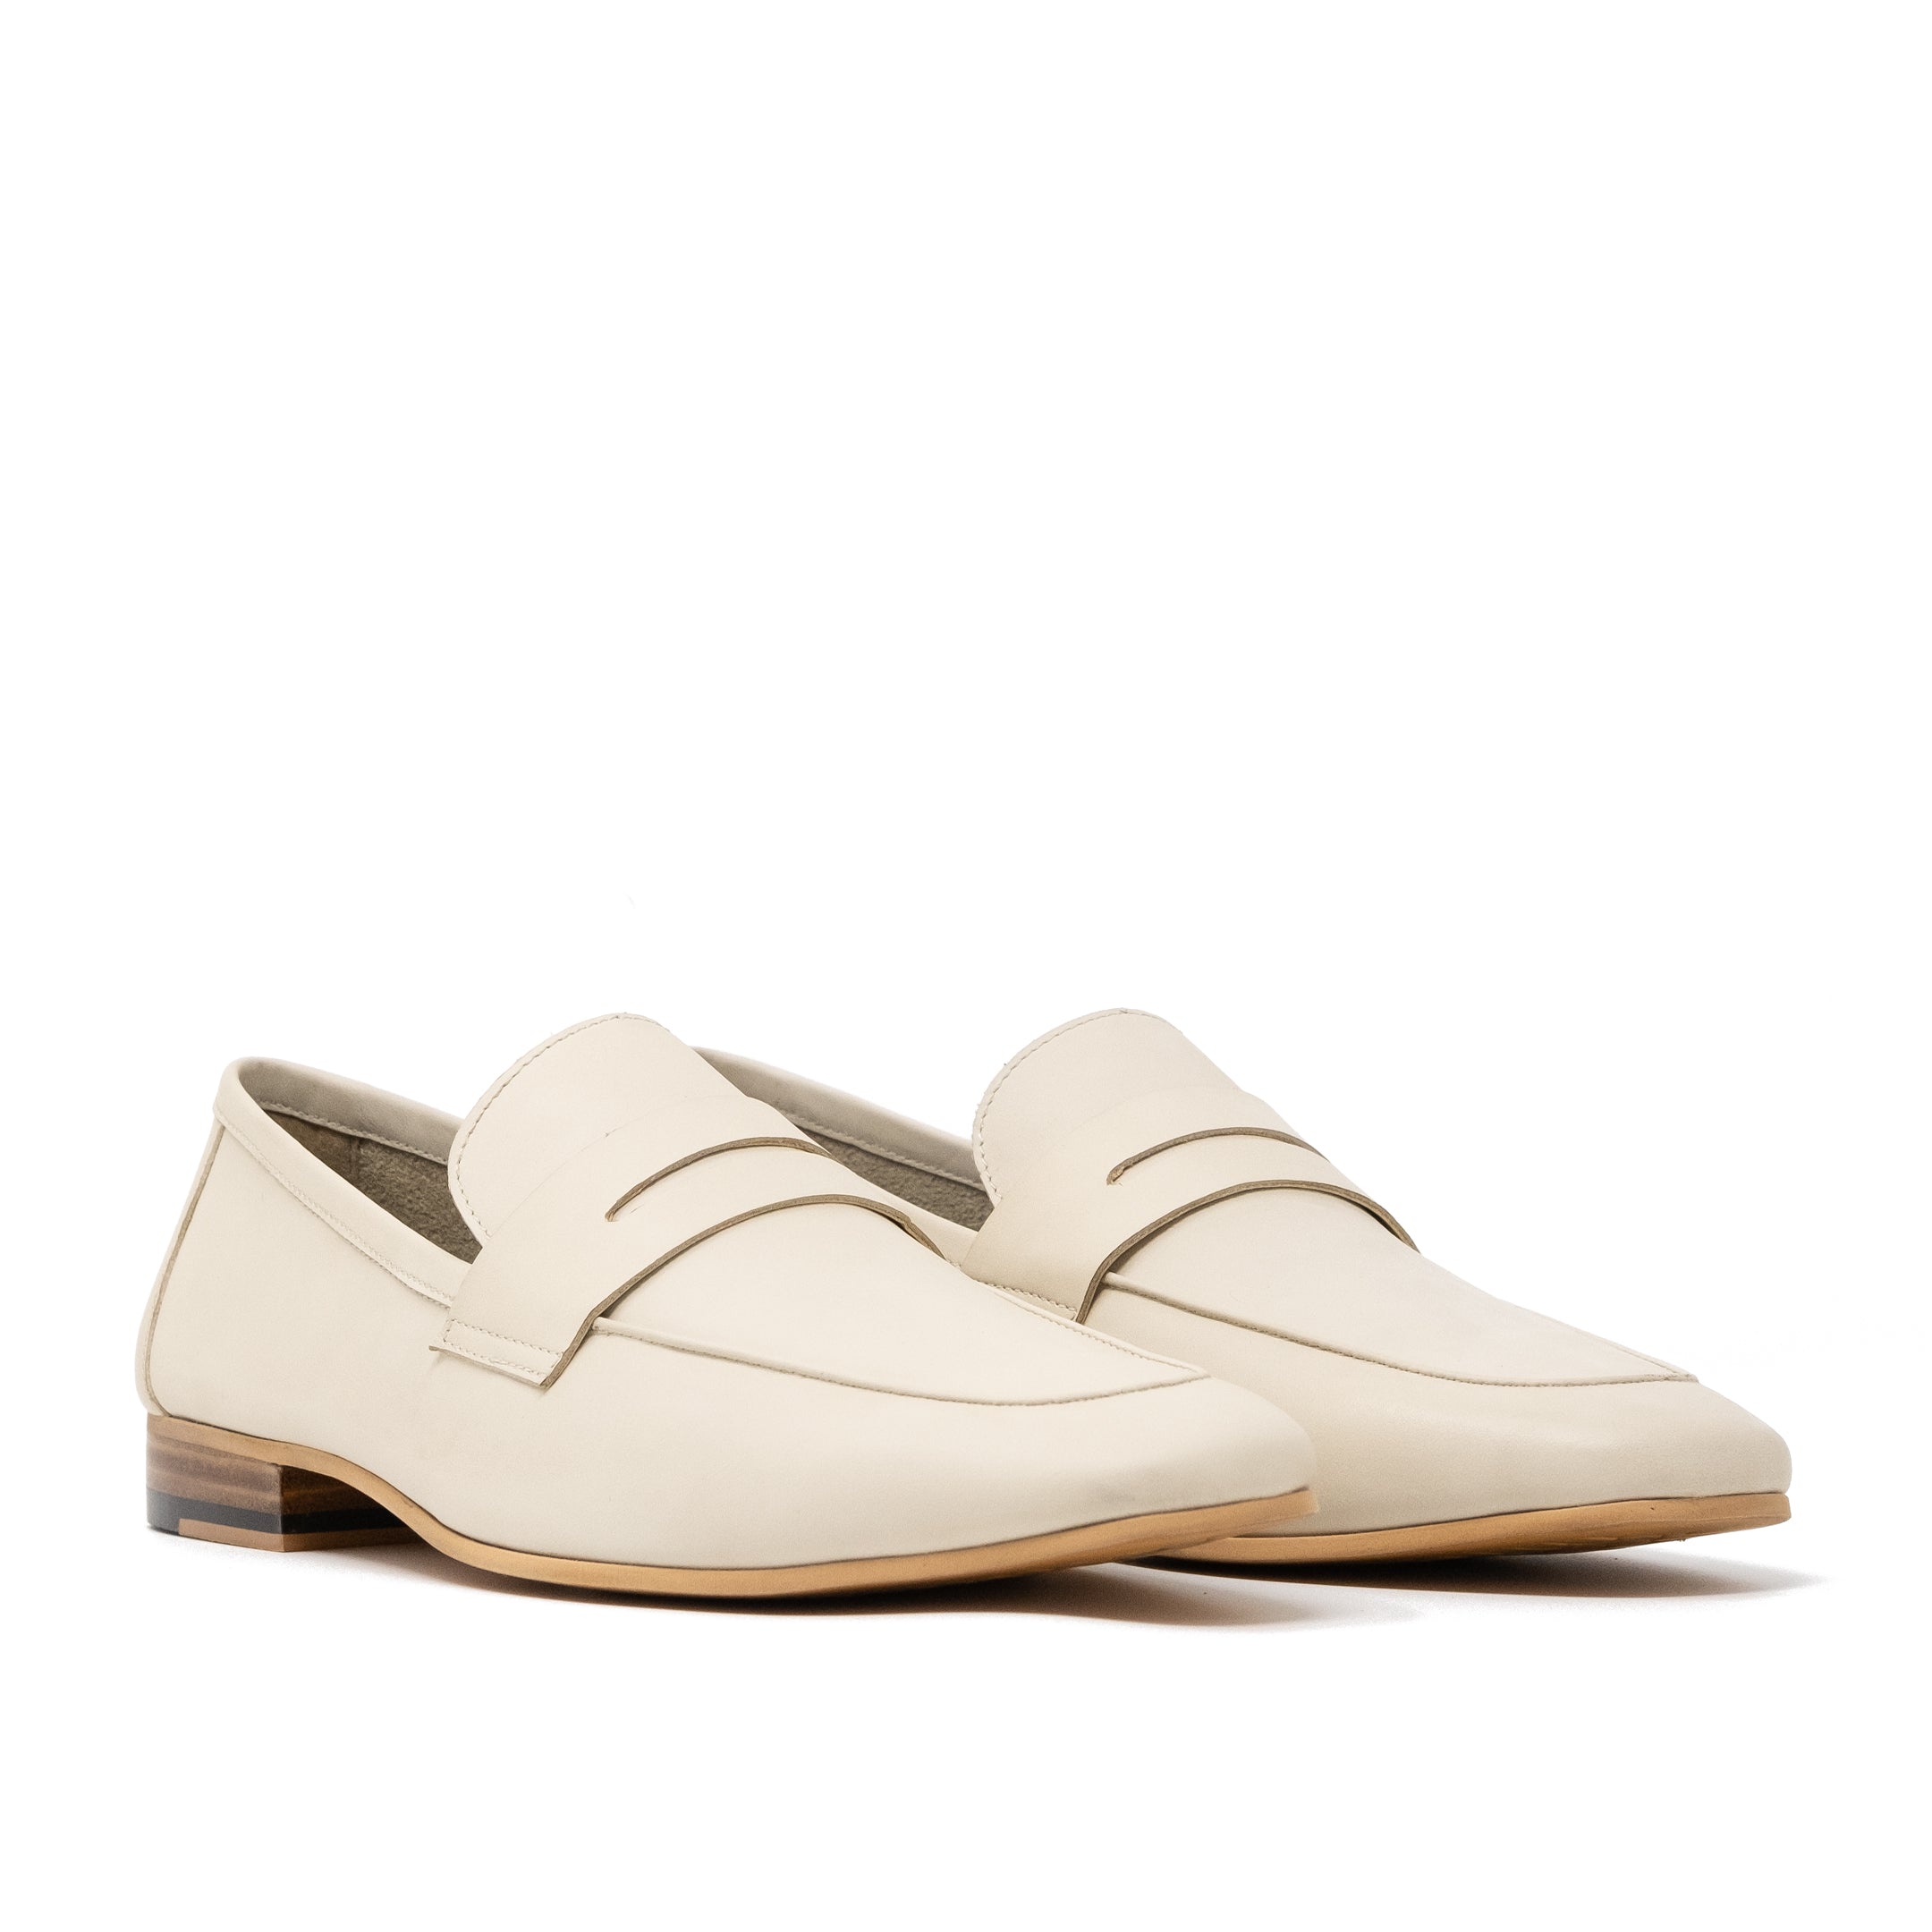 Capri Penny Loafer - Off White Leather